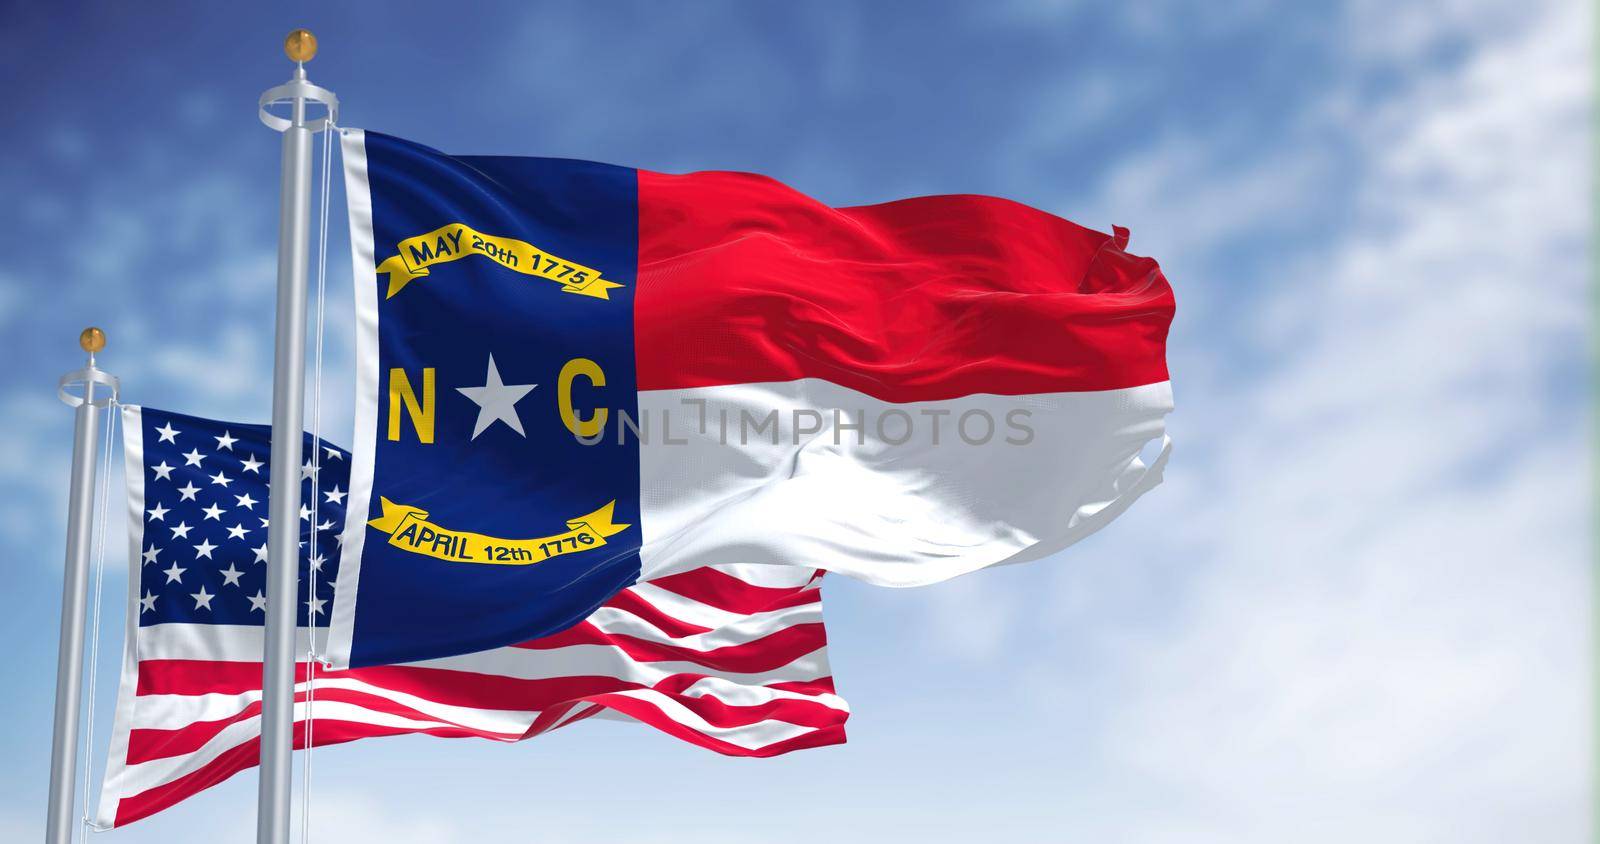 The North Carolina state flag waving along with the national flag of the United States of America by rarrarorro